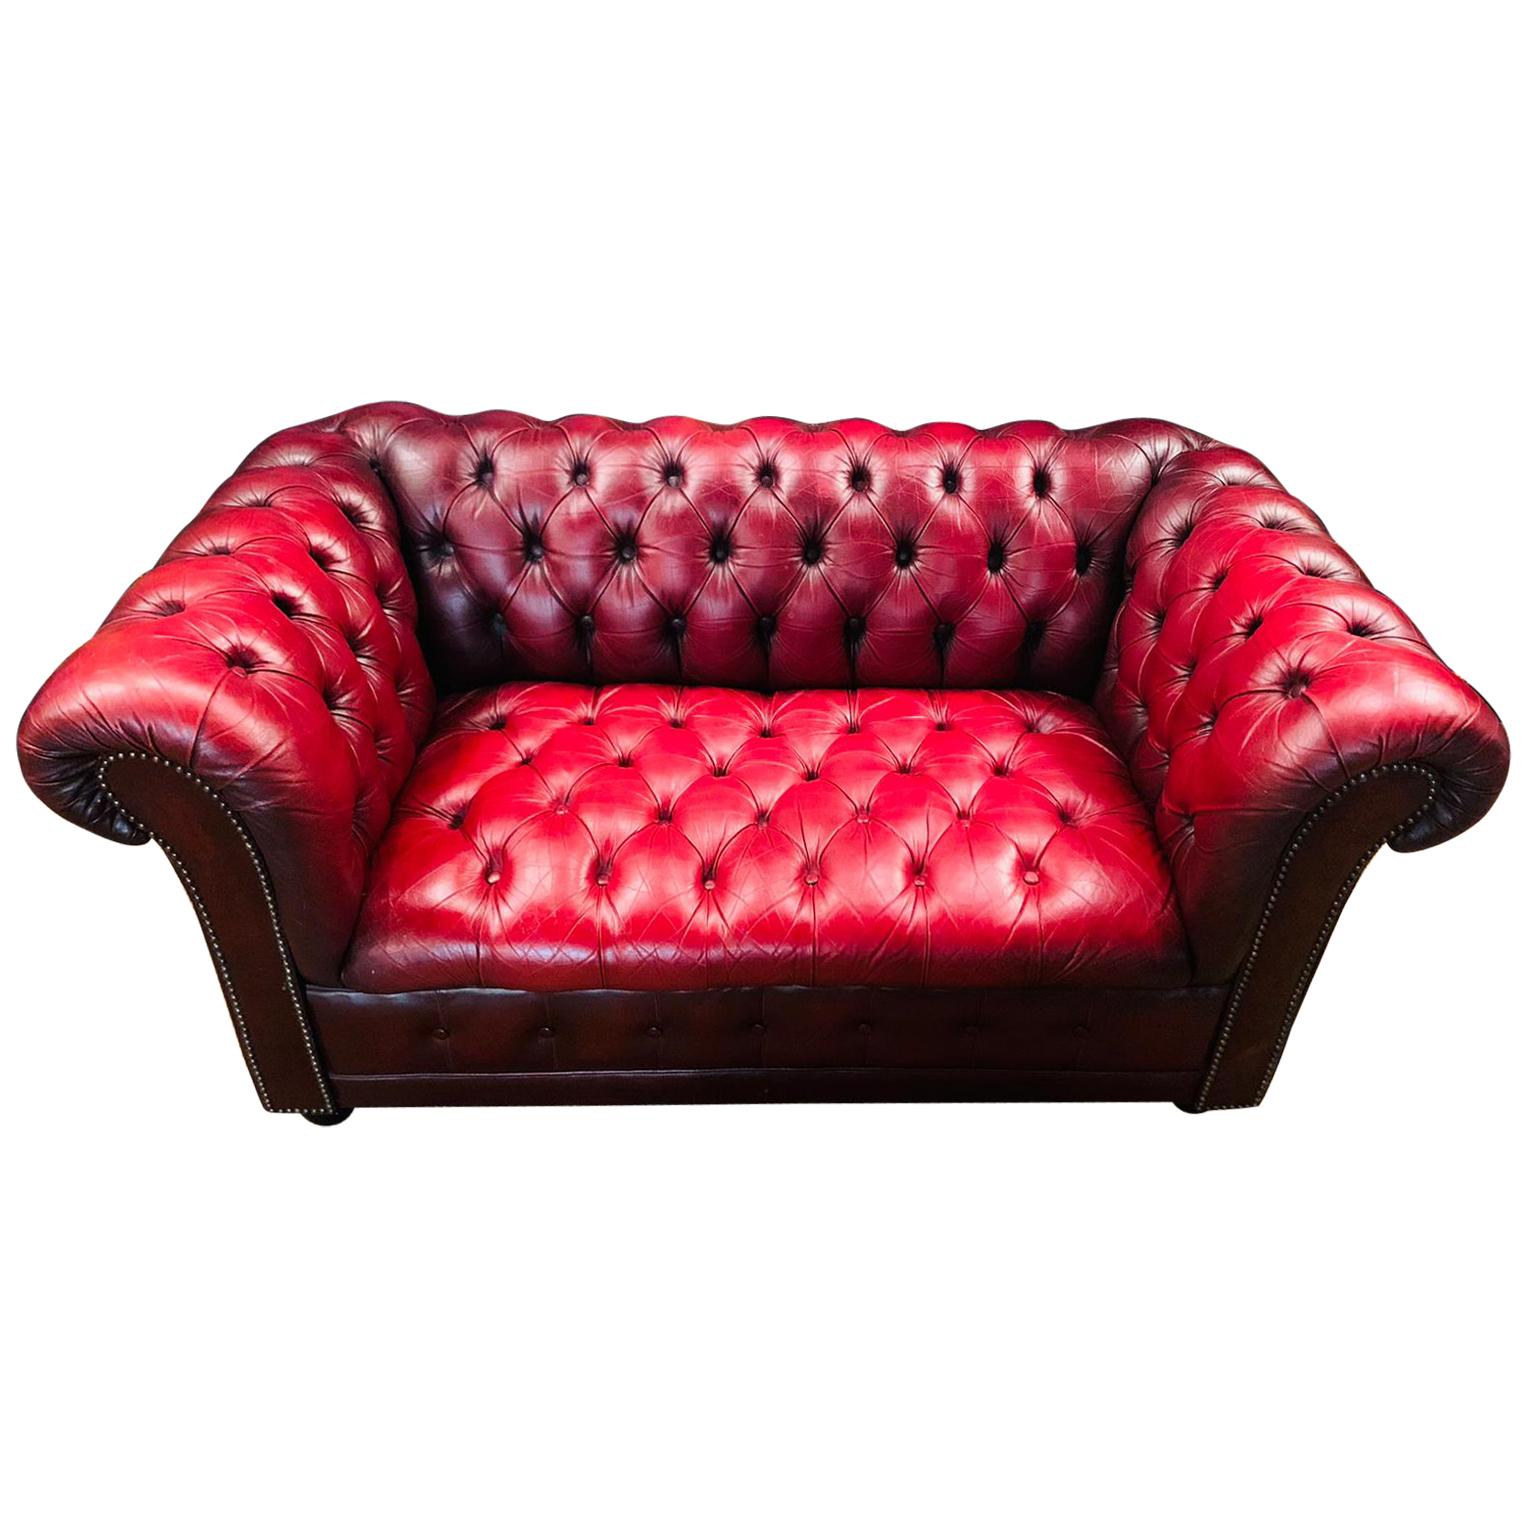 Stunning Vintage English Red Leather Chesterfield Sofa Made by Pendragon  For Sale at 1stDibs | pendragon chesterfield sofa, pendragon furniture,  pendragon leather